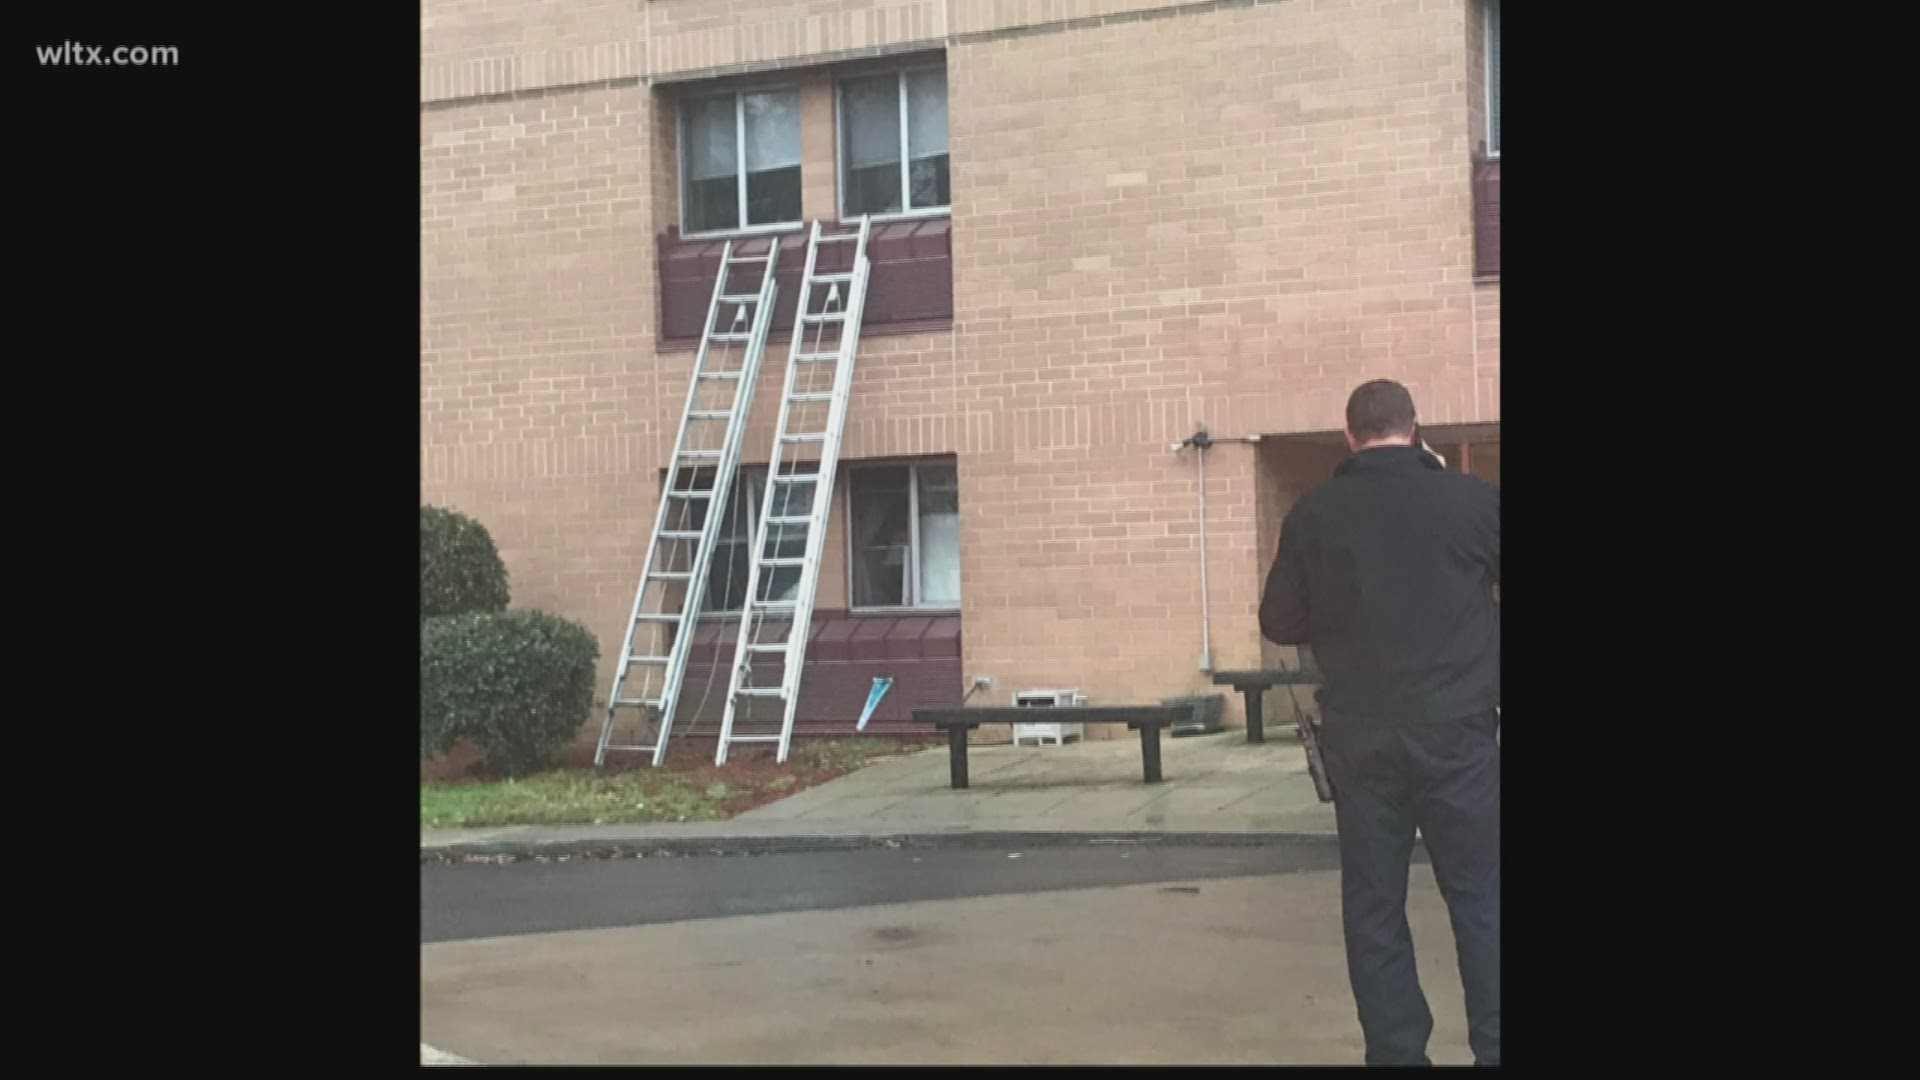 On person has been displaced after a fire at Palmetto Towers in Sumter on Friday.